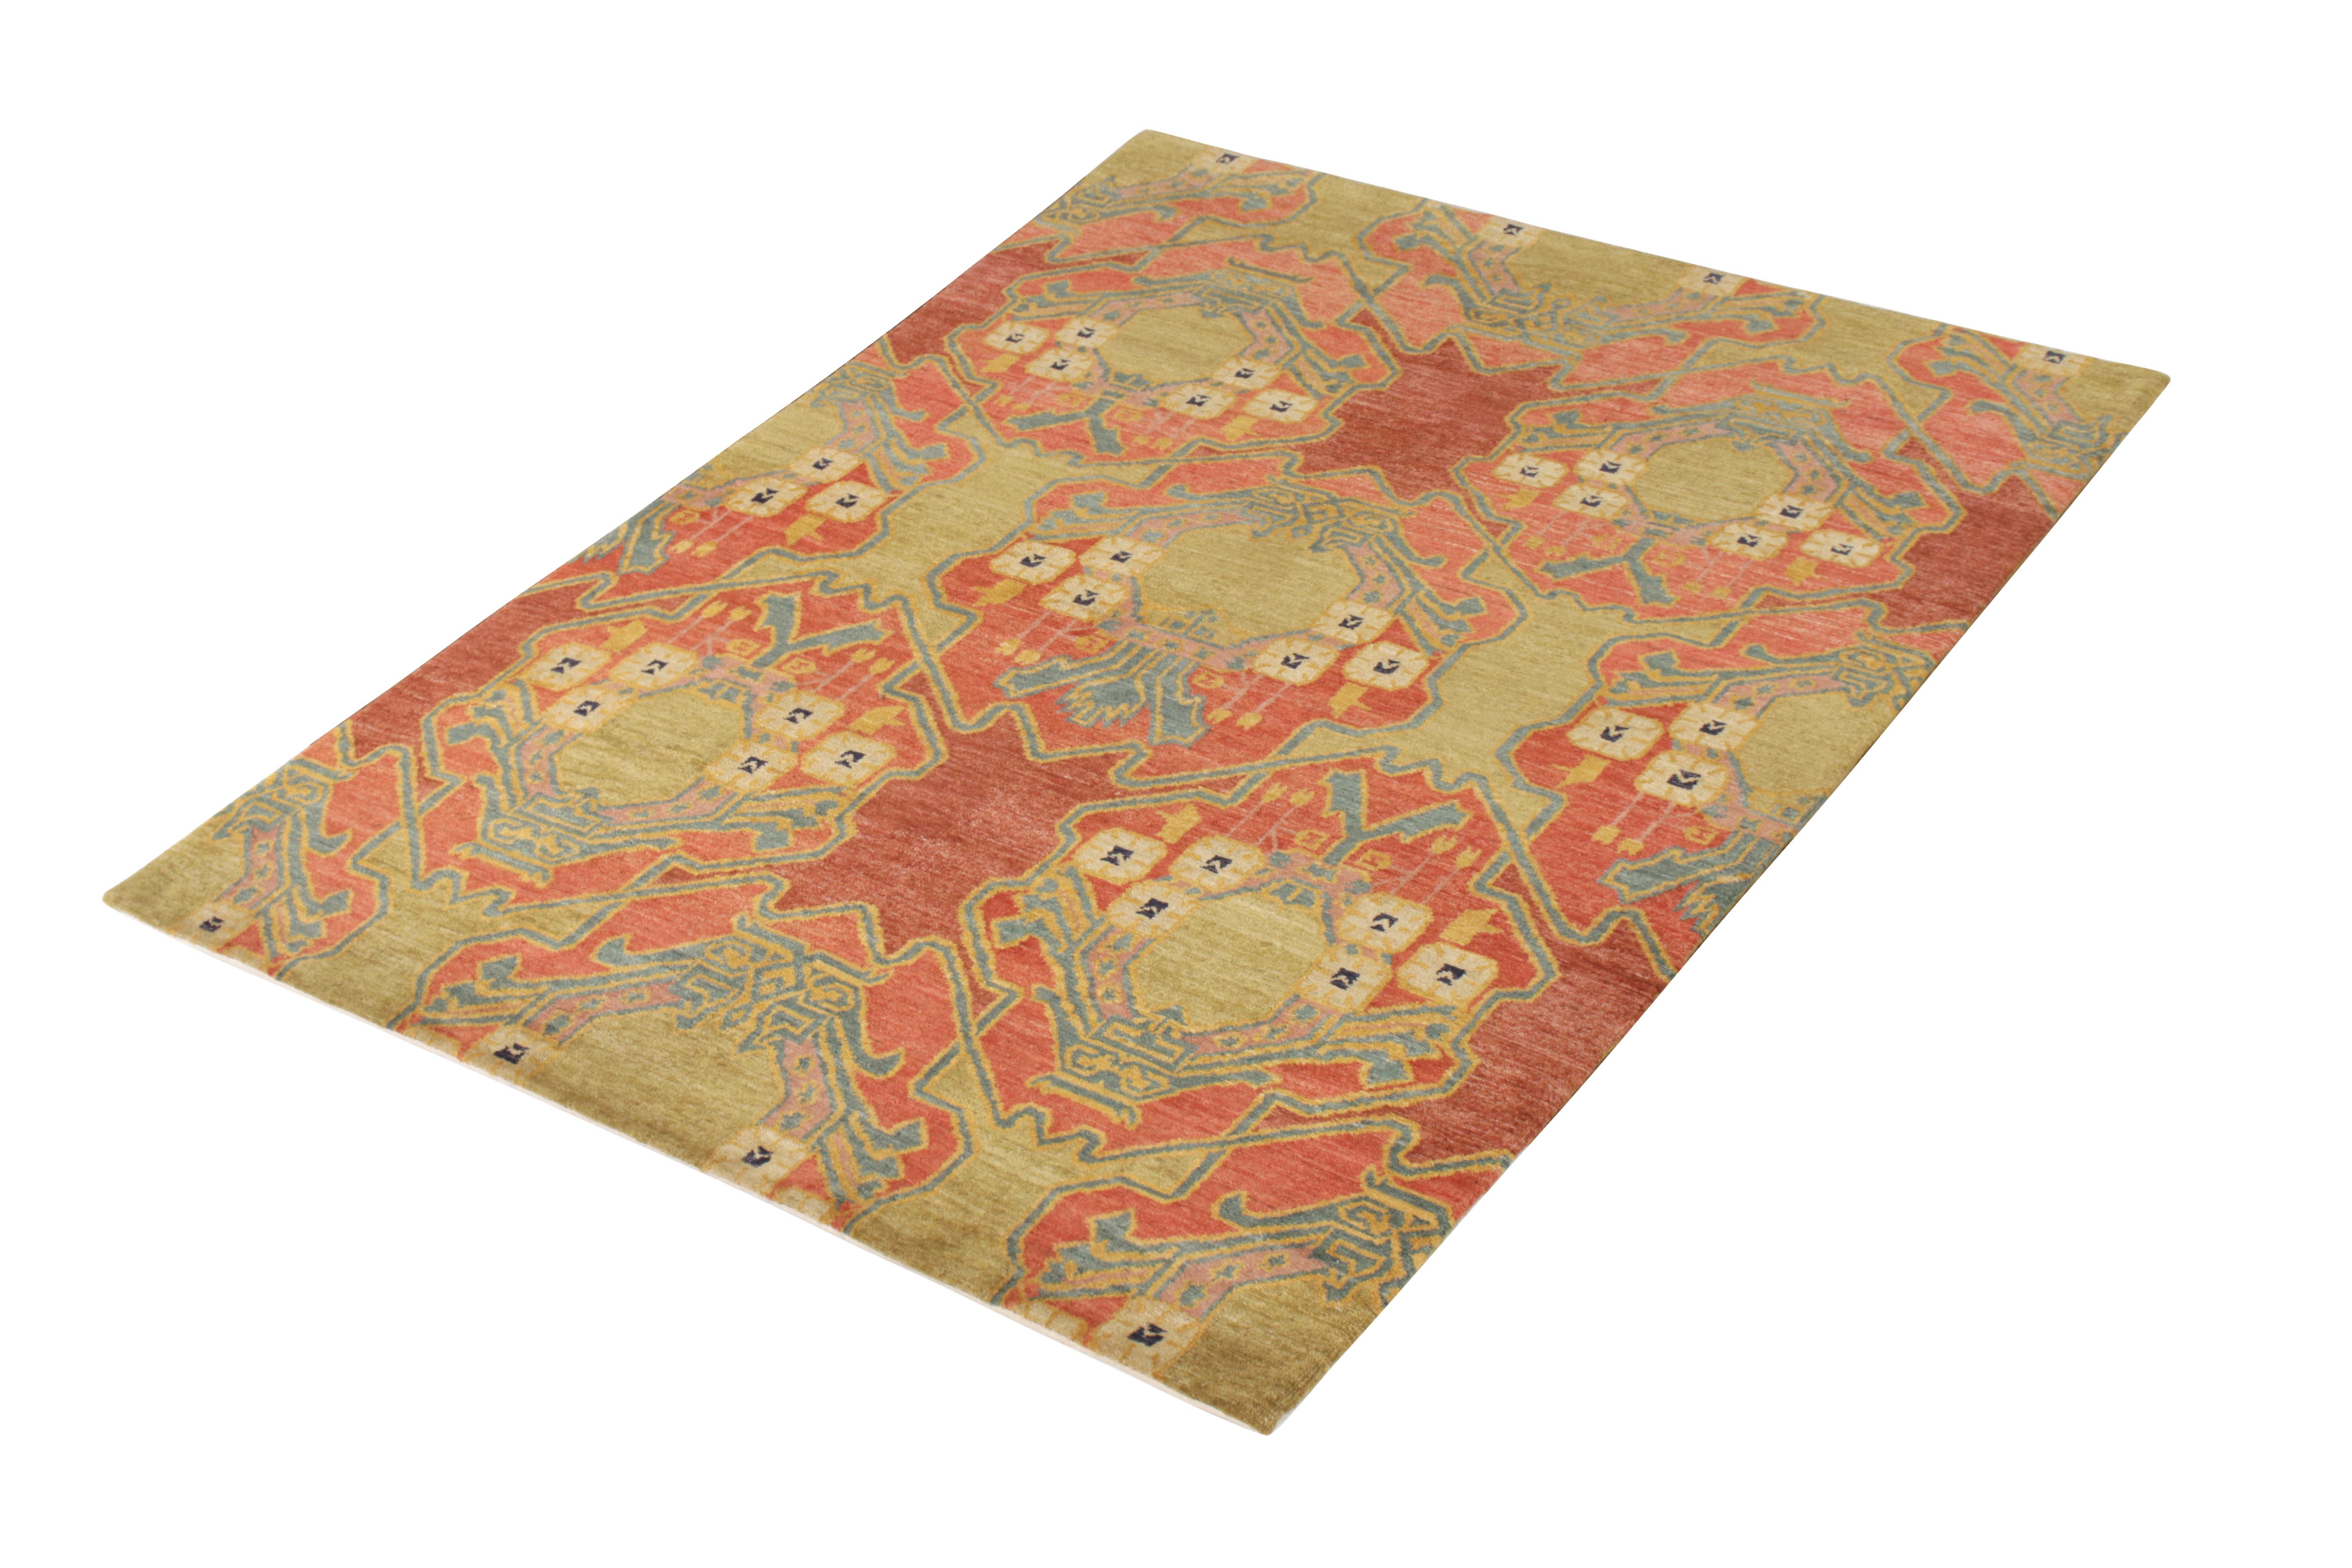 A 6x9 ode to Ersari rug inspirations in red and green, from Rug & Kilim’s Modern Classics Collection. This hand-knotted wool rug is a new piece from designer Teddy Sumner, exemplifying his take to classic looks. Tasteful blue and gold accents both